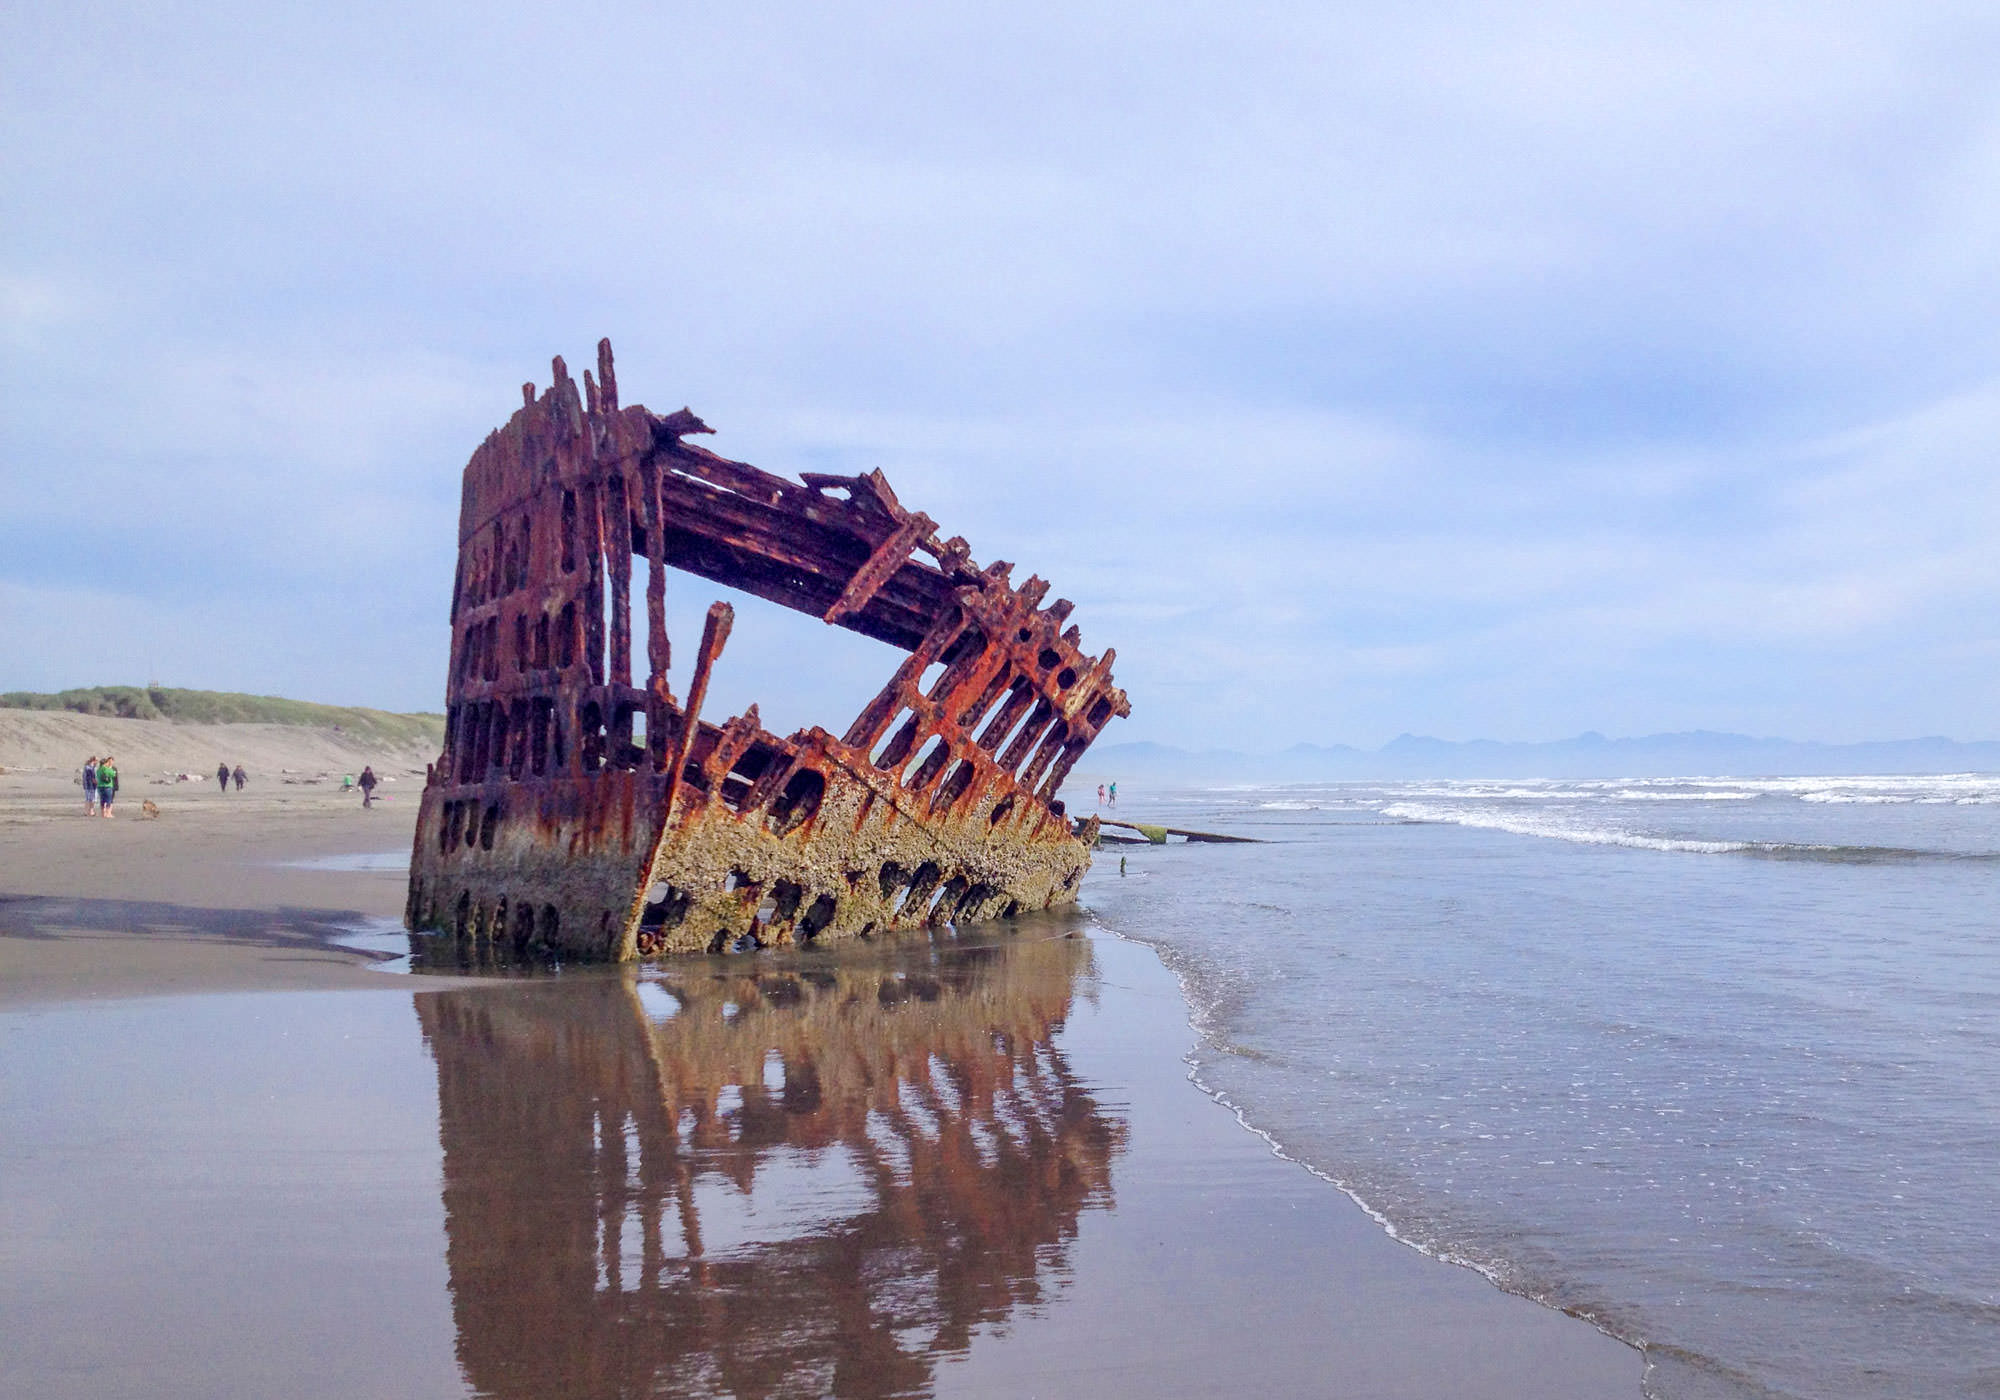 Visitors can walk up to a steel shipwreck weathered by a century at the shoreline.